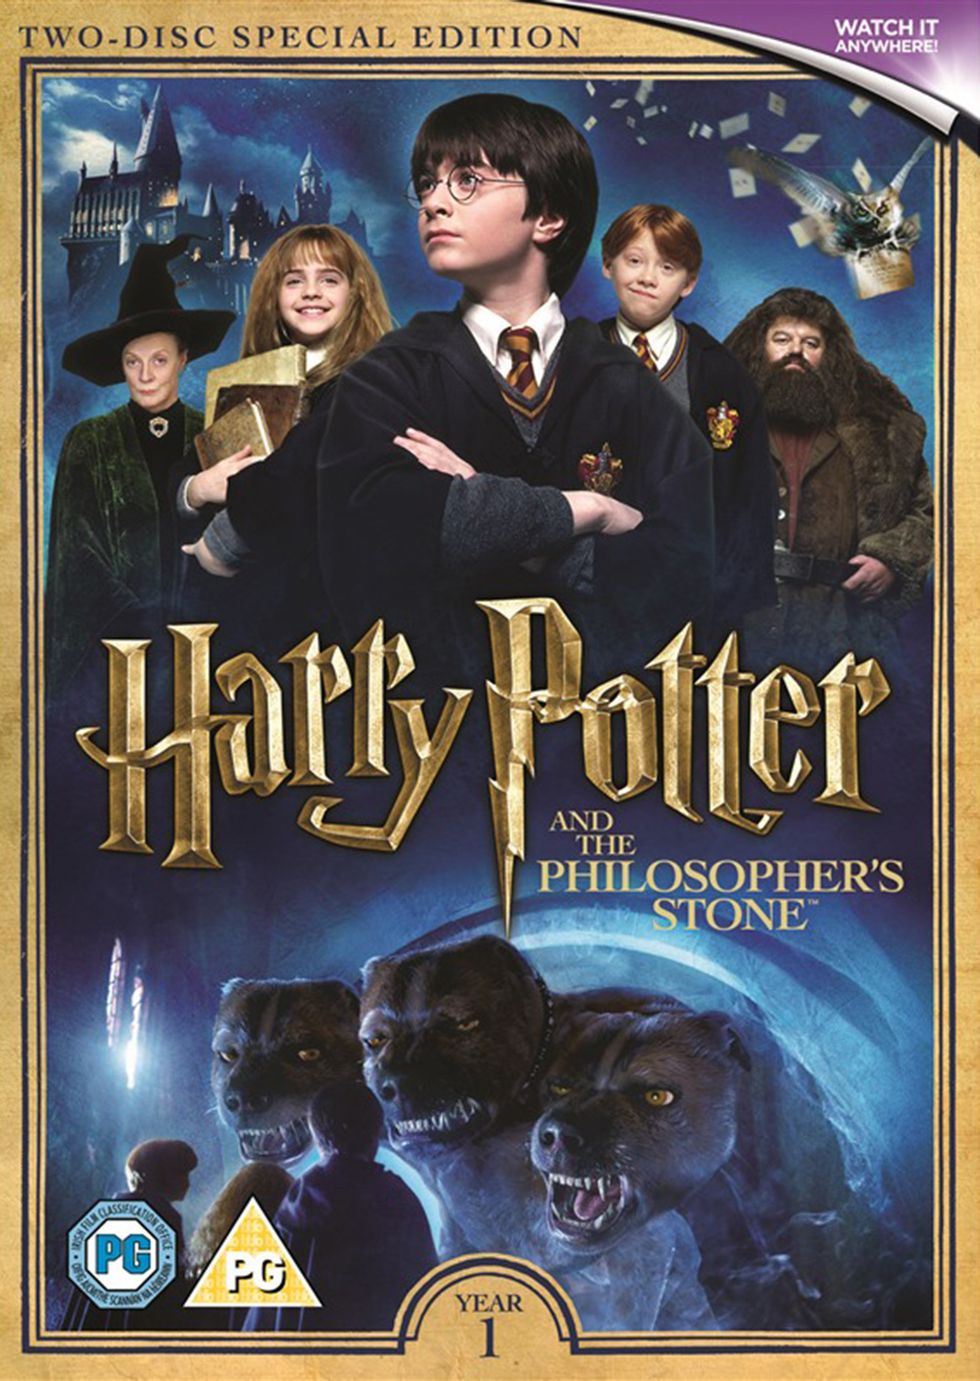 Harry Potter Movie Redesign - New Harry Potter DVD Cases